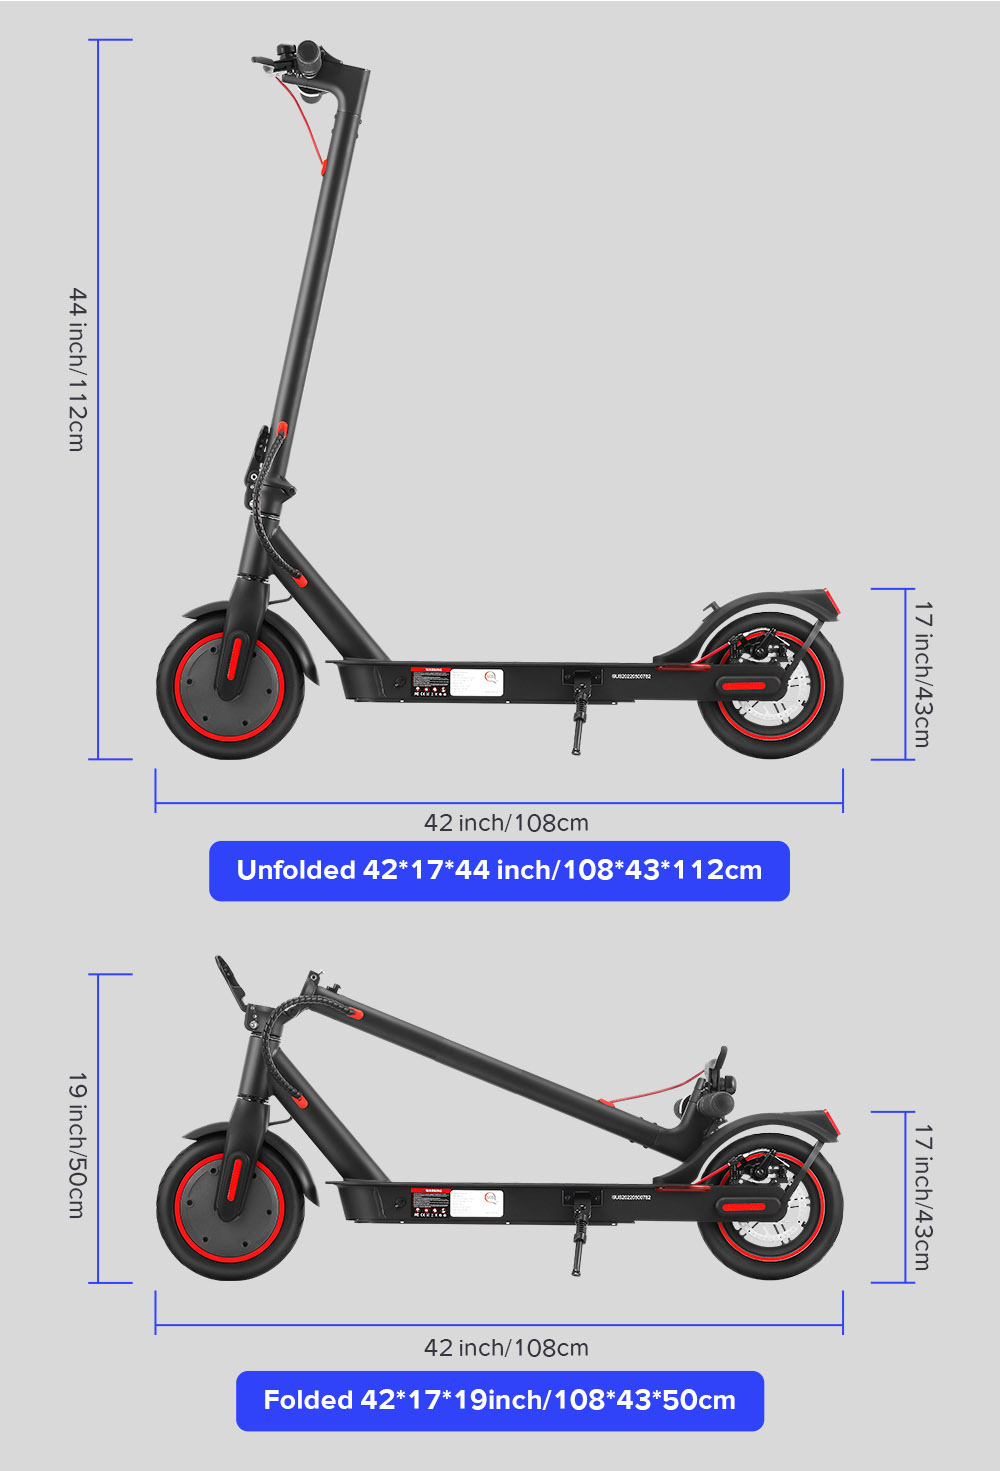 iTrottinette i9 8.5 inch electric scooter 350W motor 7.5Ah battery